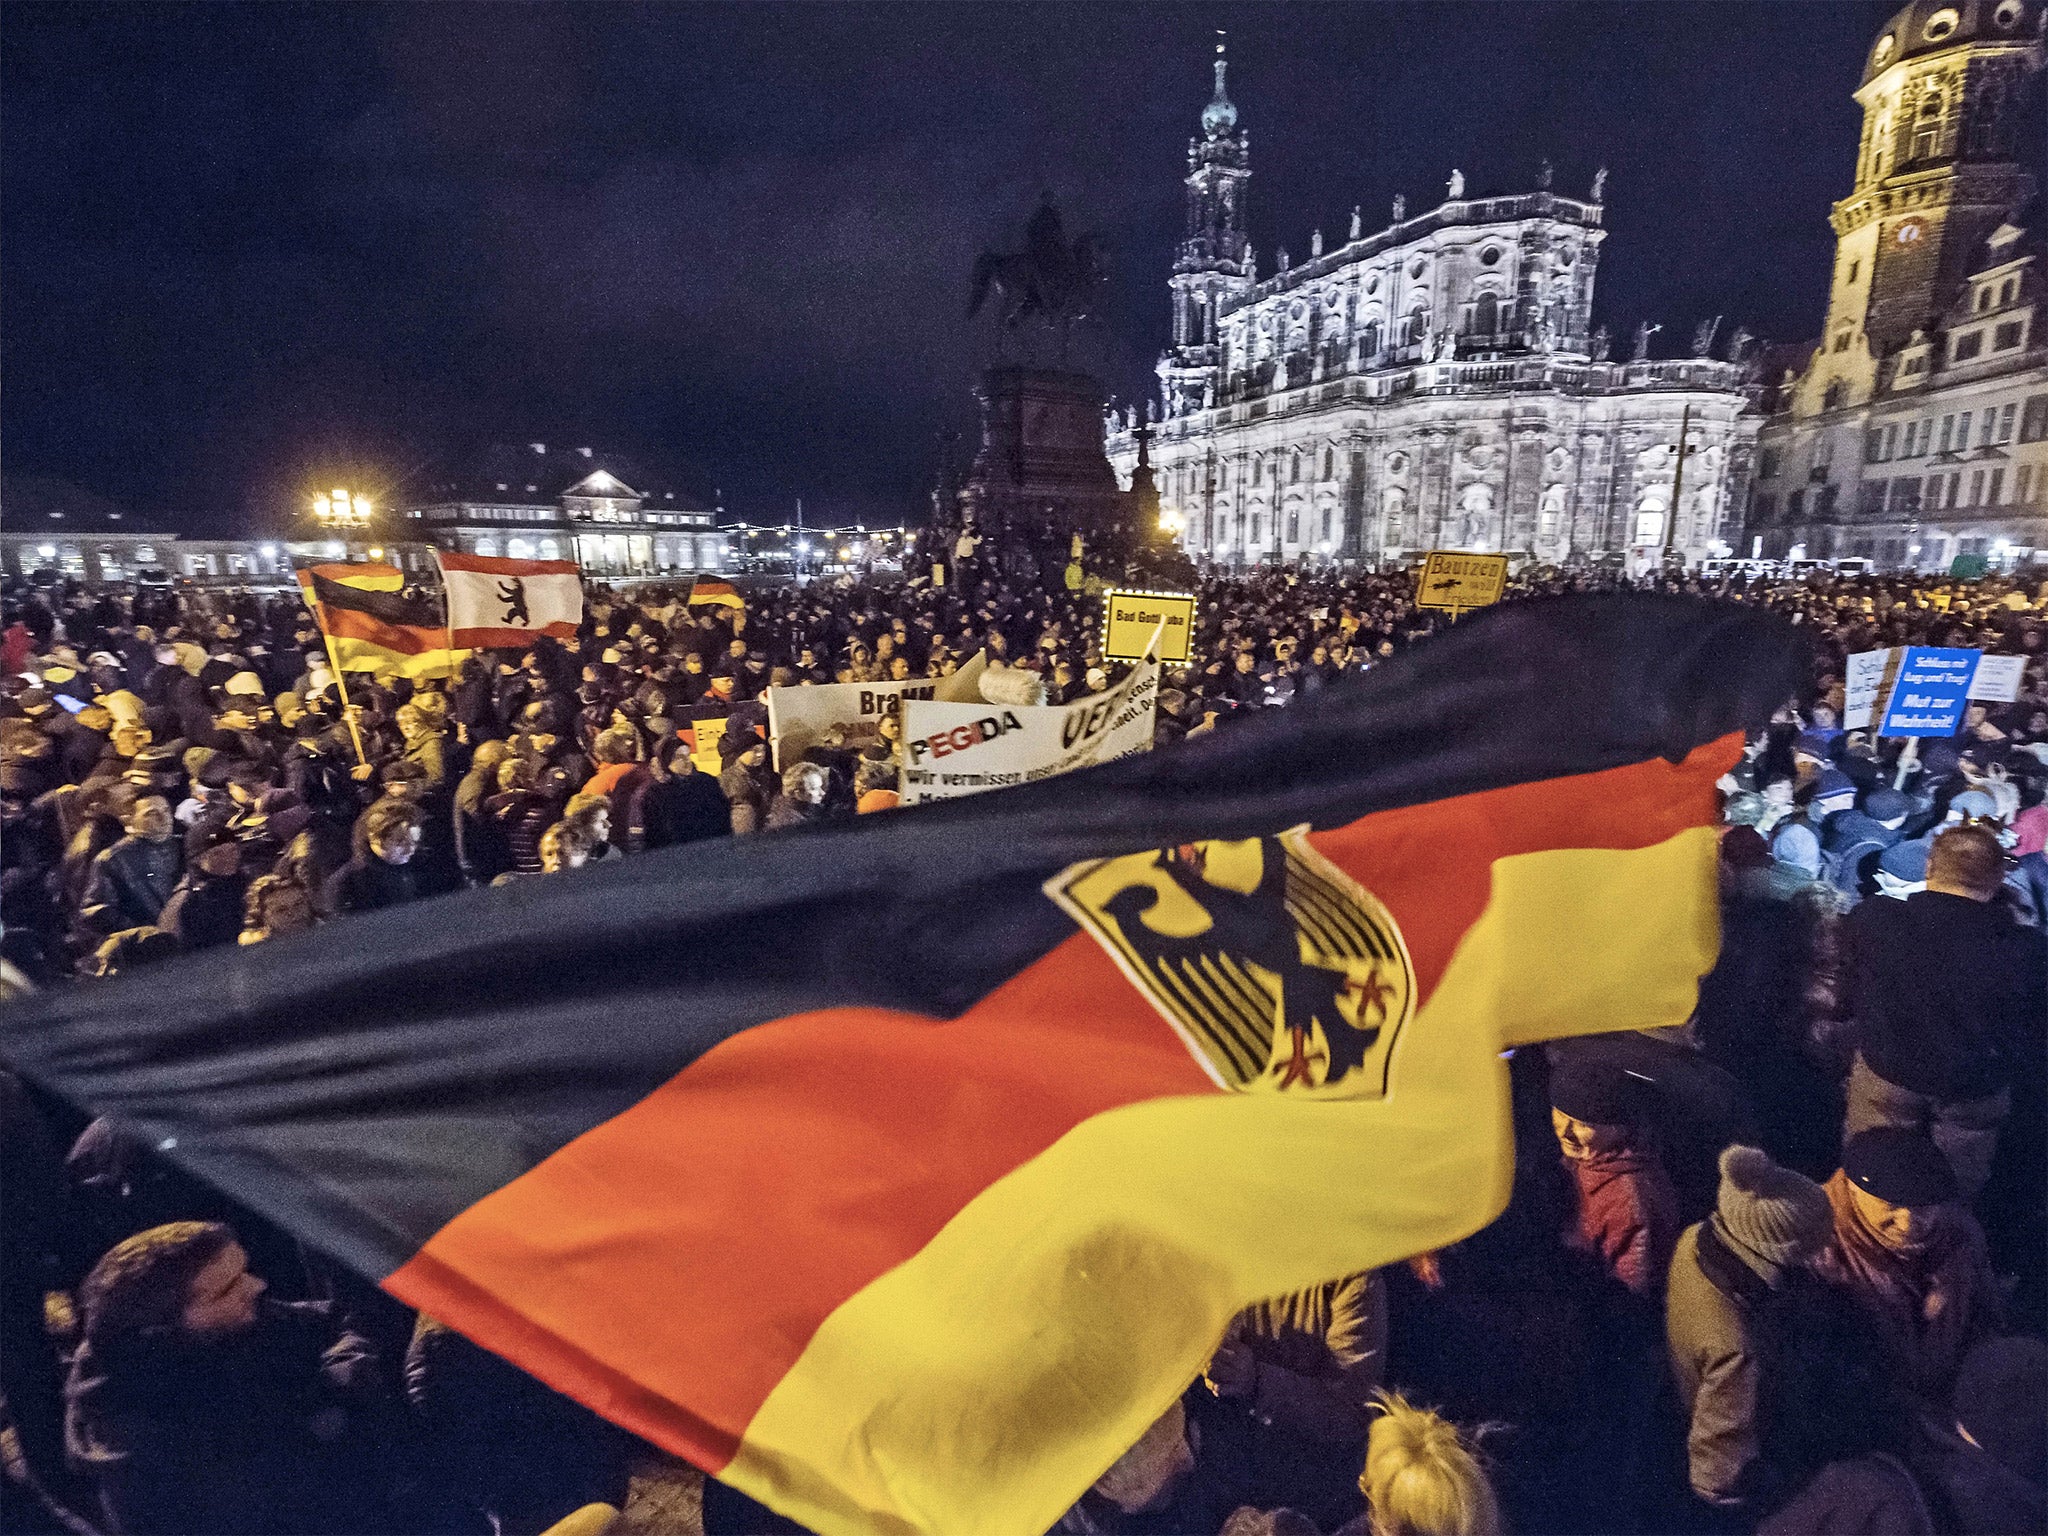 Supporters at a Pegida rally hold German flags and lights during a demonstration held each week for the past 10 weeks in front of the Dresden Cathedral in eastern Germany